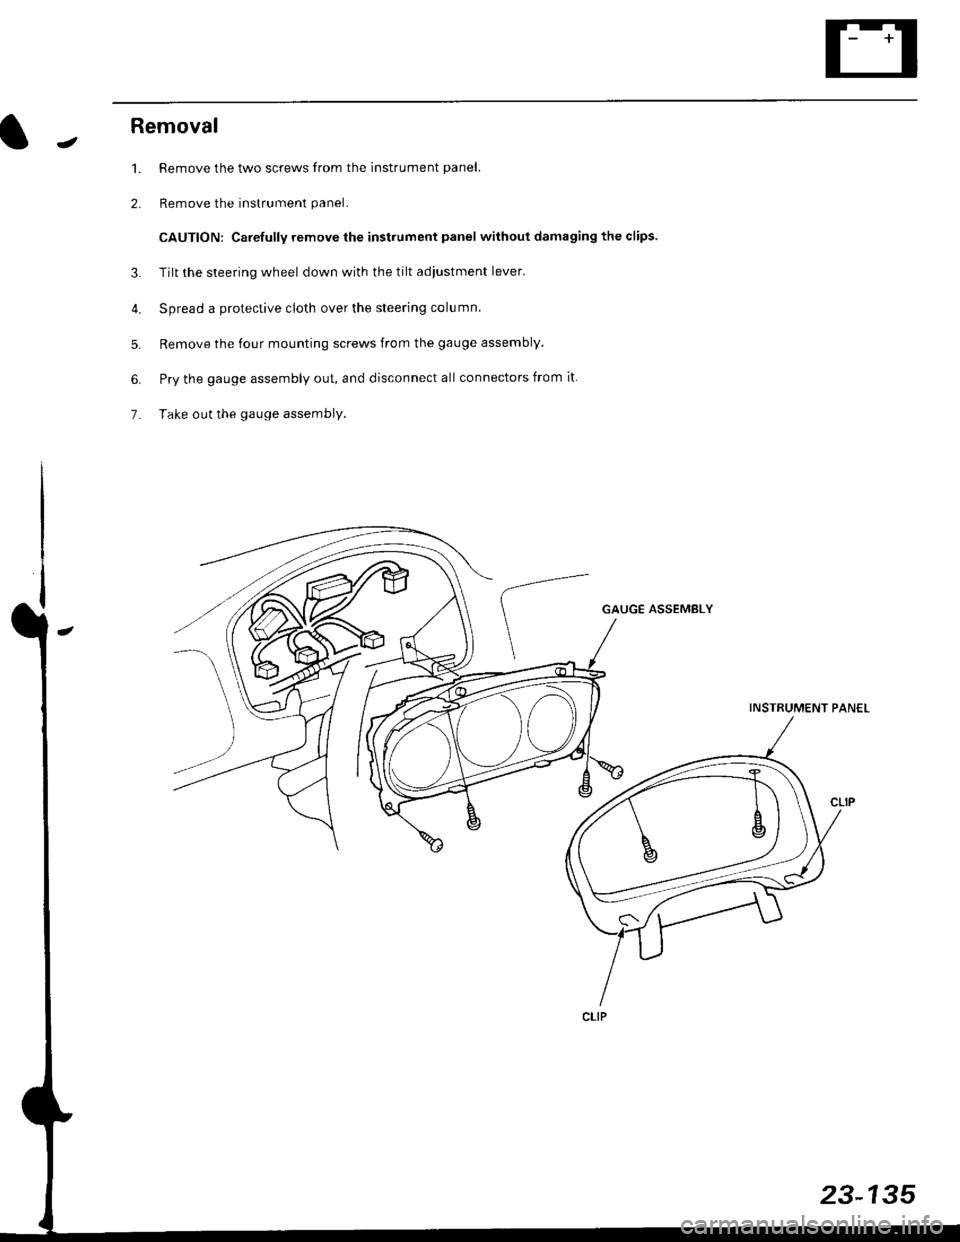 HONDA CIVIC 1999 6.G Workshop Manual JRemoval
1. Remove the two screws from the instrument panel.
2. Remove the instrument panel.
CAUTION: Carefully remove the instrument panel without damaging the clips.
3. Tilt the steering wheel down 